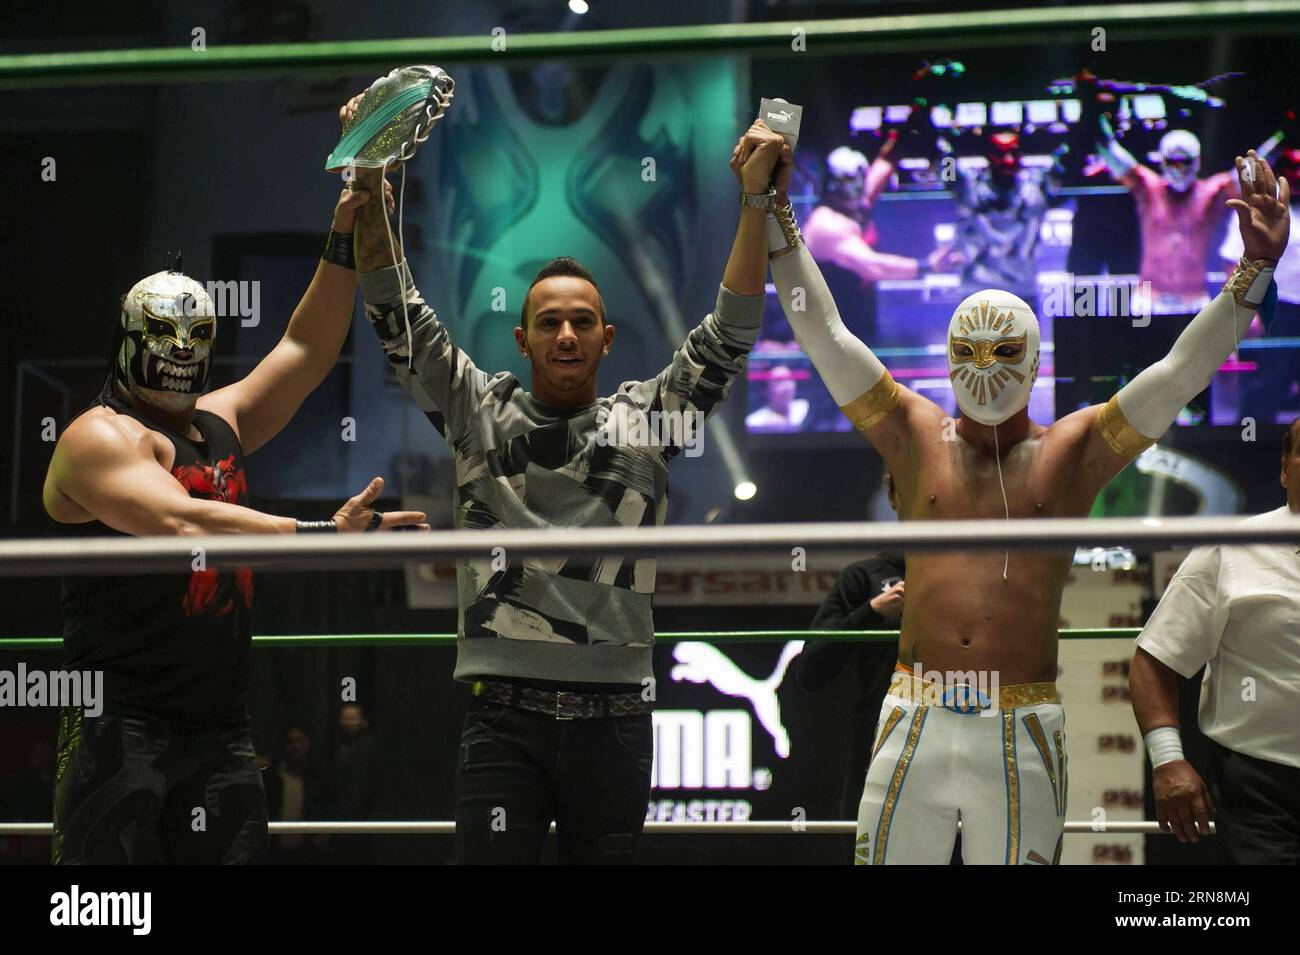 (151029) -- MEXICO CITY,  - British driver Lewis Hamilton (C) of Mercedes team, takes part during a wrestling exhibition with Mistico (R) wrestler, during his visit to Arena Mexico, prior to the F1 Mexican Grand Prix, in Mexico City, capital of Mexico, on Oct. 28, 2015. According to local press, Lewis Hamilton visited on Wednesday the Arena Mexico, where he watched a wrestling exhibition and played a match of table football at the ring with Mexican soccer player Oribe Peralta. The F1 Mexican Grand Prix will be held from Oct. 30 to Nov. 1, in Mexico City. ) (SP)MEXICO-MEXICO CITY-AUTOMOBILE-F1 Stock Photo